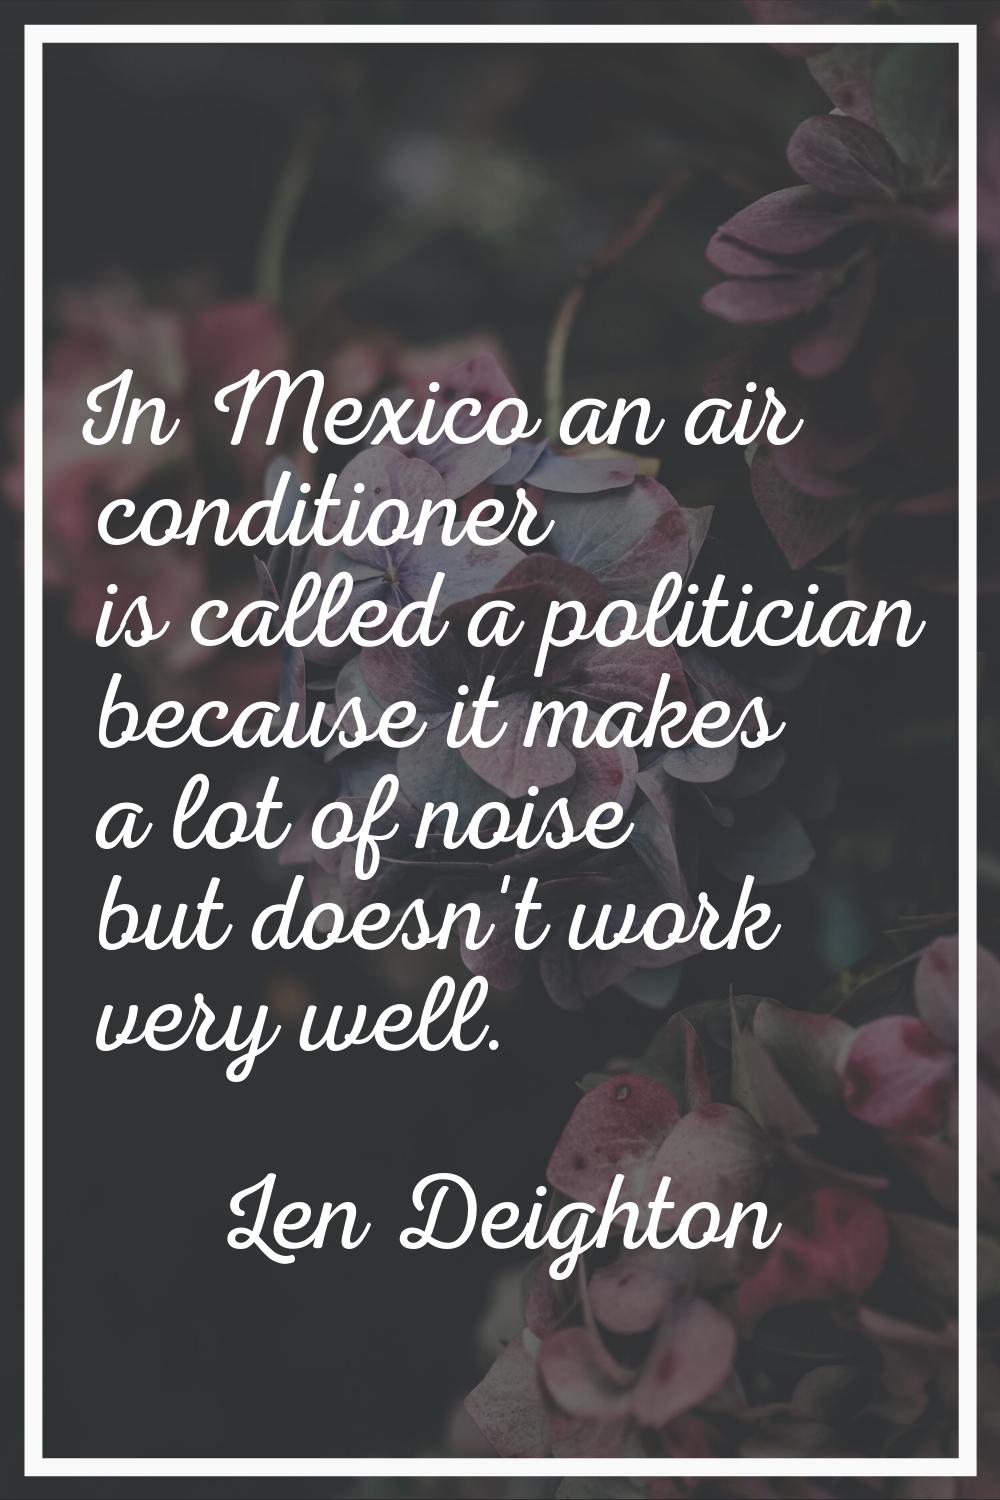 In Mexico an air conditioner is called a politician because it makes a lot of noise but doesn't wor